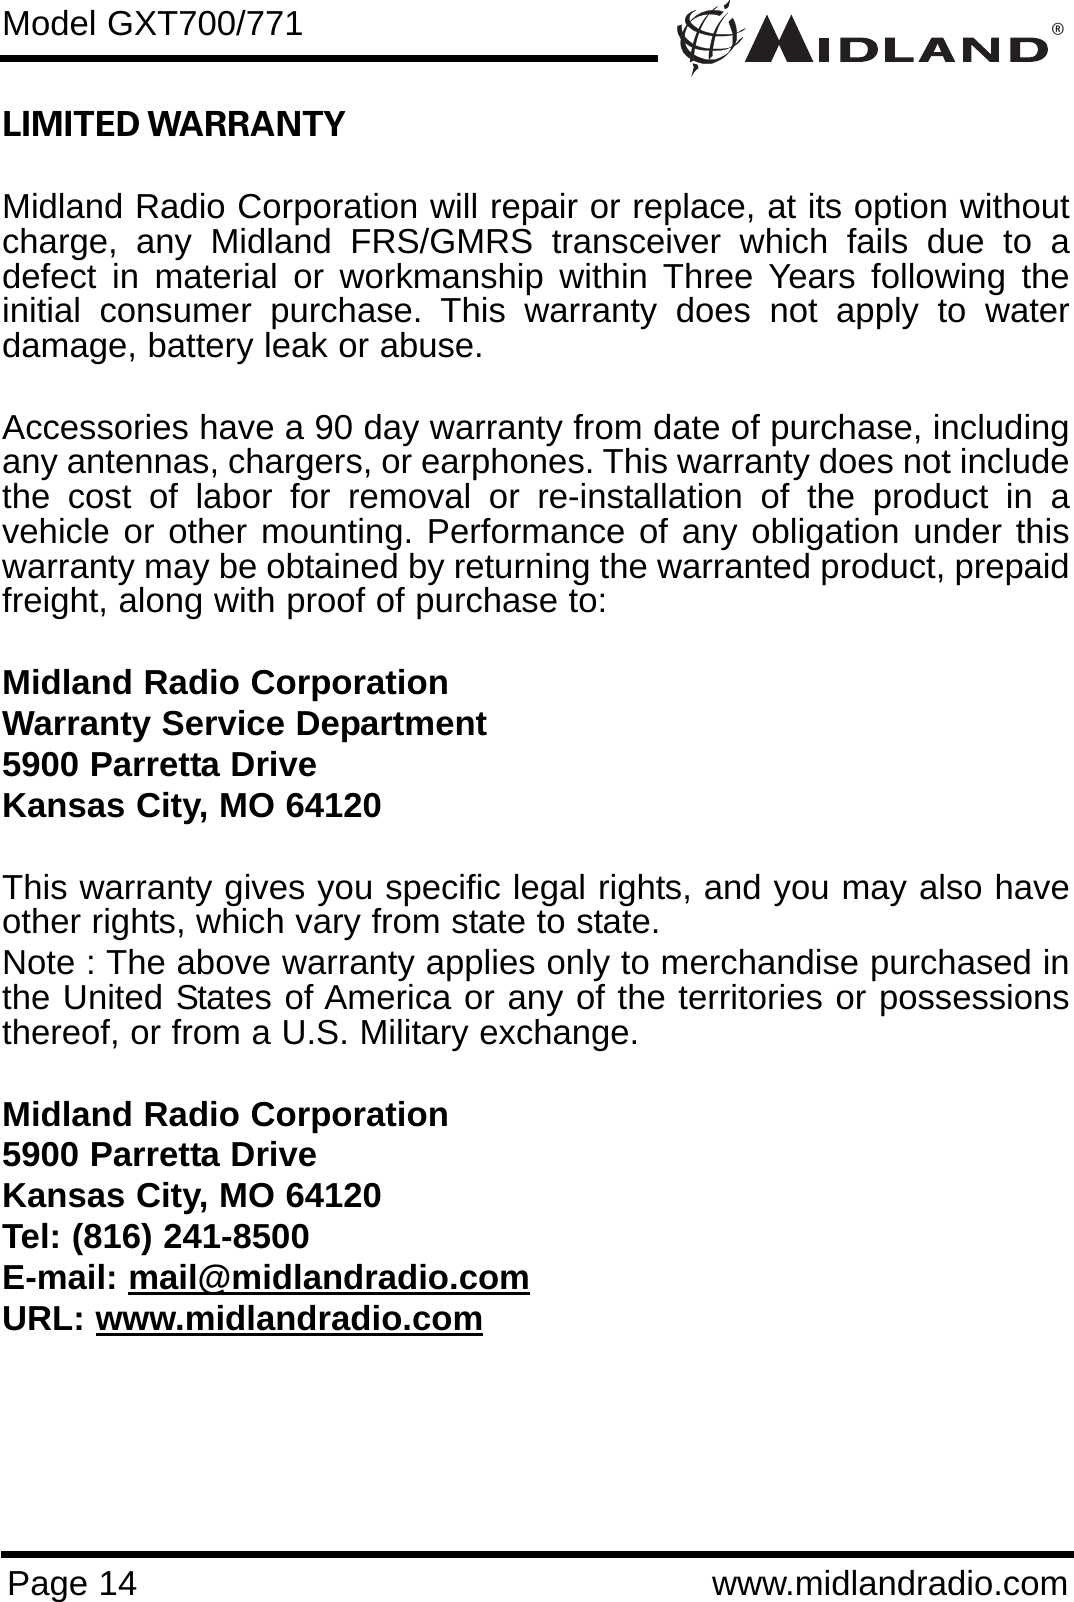 ®Page 14 www.midlandradio.comLIMITED WARRANTY Midland Radio Corporation will repair or replace, at its option withoutcharge, any Midland FRS/GMRS transceiver which fails due to adefect in material or workmanship within Three Years following theinitial consumer purchase. This warranty does not apply to waterdamage, battery leak or abuse.Accessories have a 90 day warranty from date of purchase, includingany antennas, chargers, or earphones. This warranty does not includethe cost of labor for removal or re-installation of the product in avehicle or other mounting. Performance of any obligation under thiswarranty may be obtained by returning the warranted product, prepaidfreight, along with proof of purchase to:Midland Radio CorporationWarranty Service Department5900 Parretta DriveKansas City, MO 64120This warranty gives you specific legal rights, and you may also haveother rights, which vary from state to state.Note : The above warranty applies only to merchandise purchased inthe United States of America or any of the territories or possessionsthereof, or from a U.S. Military exchange.Midland Radio Corporation5900 Parretta DriveKansas City, MO 64120Tel: (816) 241-8500E-mail: mail@midlandradio.comURL: www.midlandradio.comModel GXT700/771